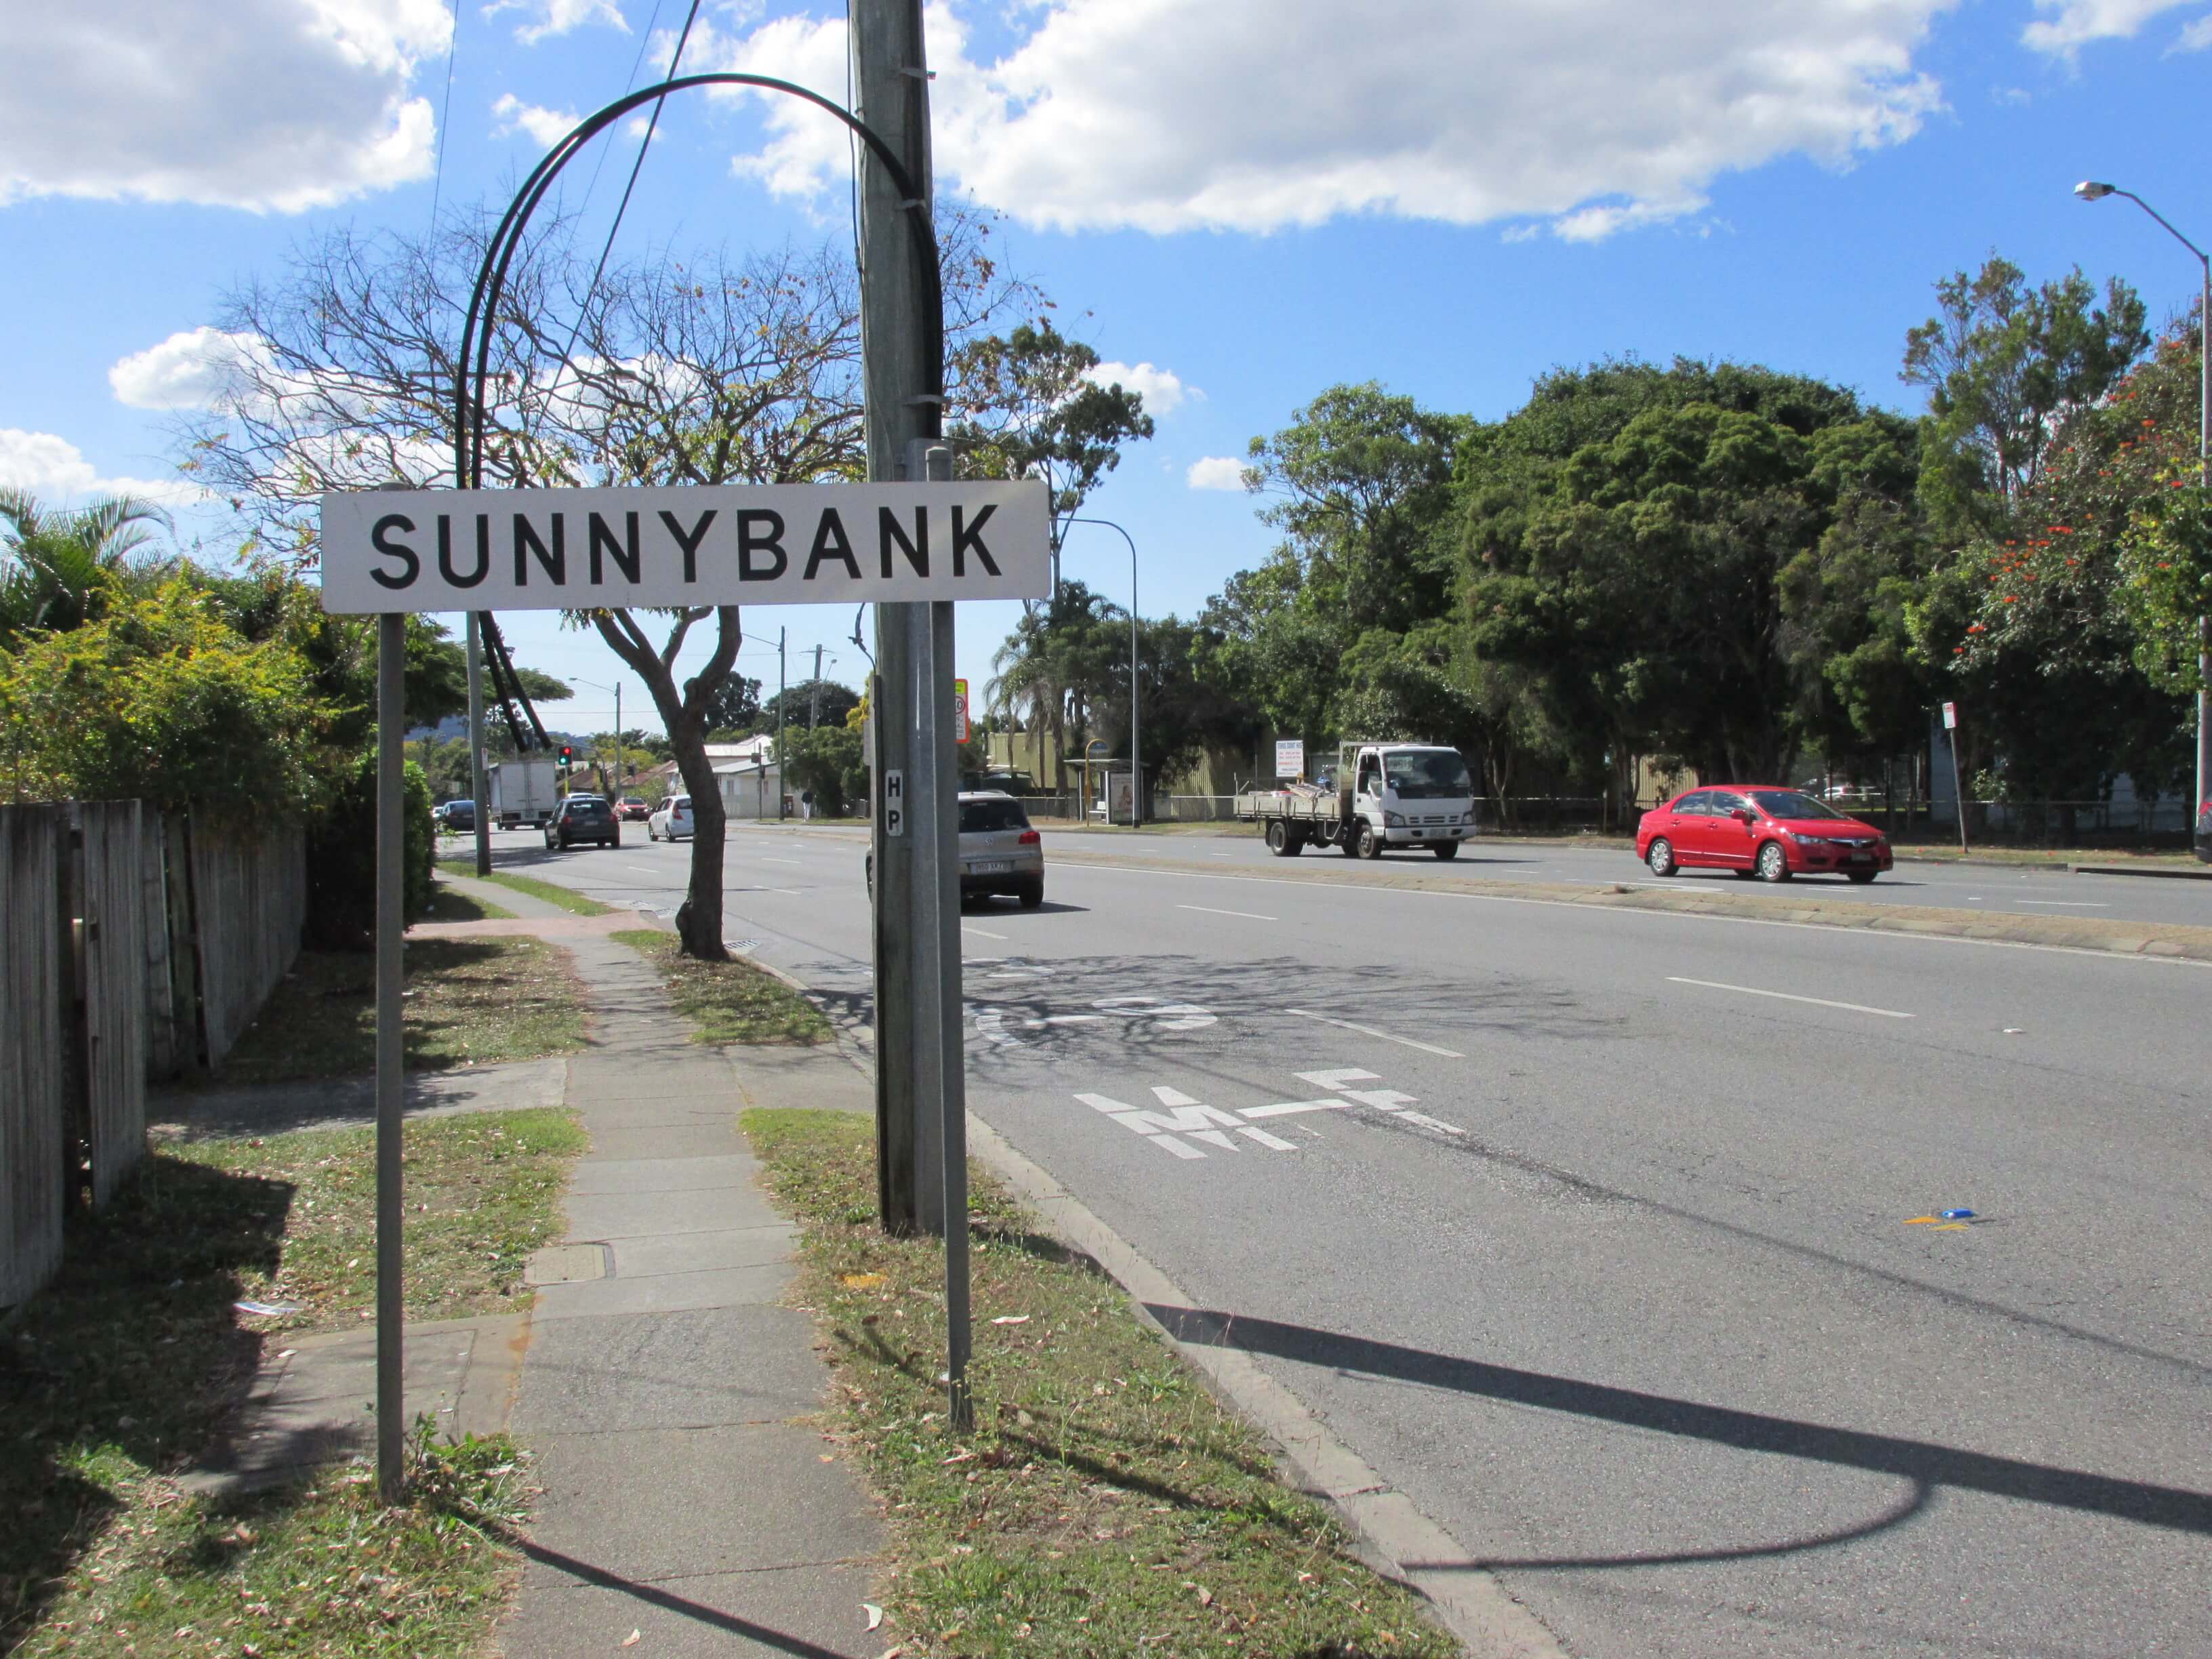 About Sunnybank Hills Qld